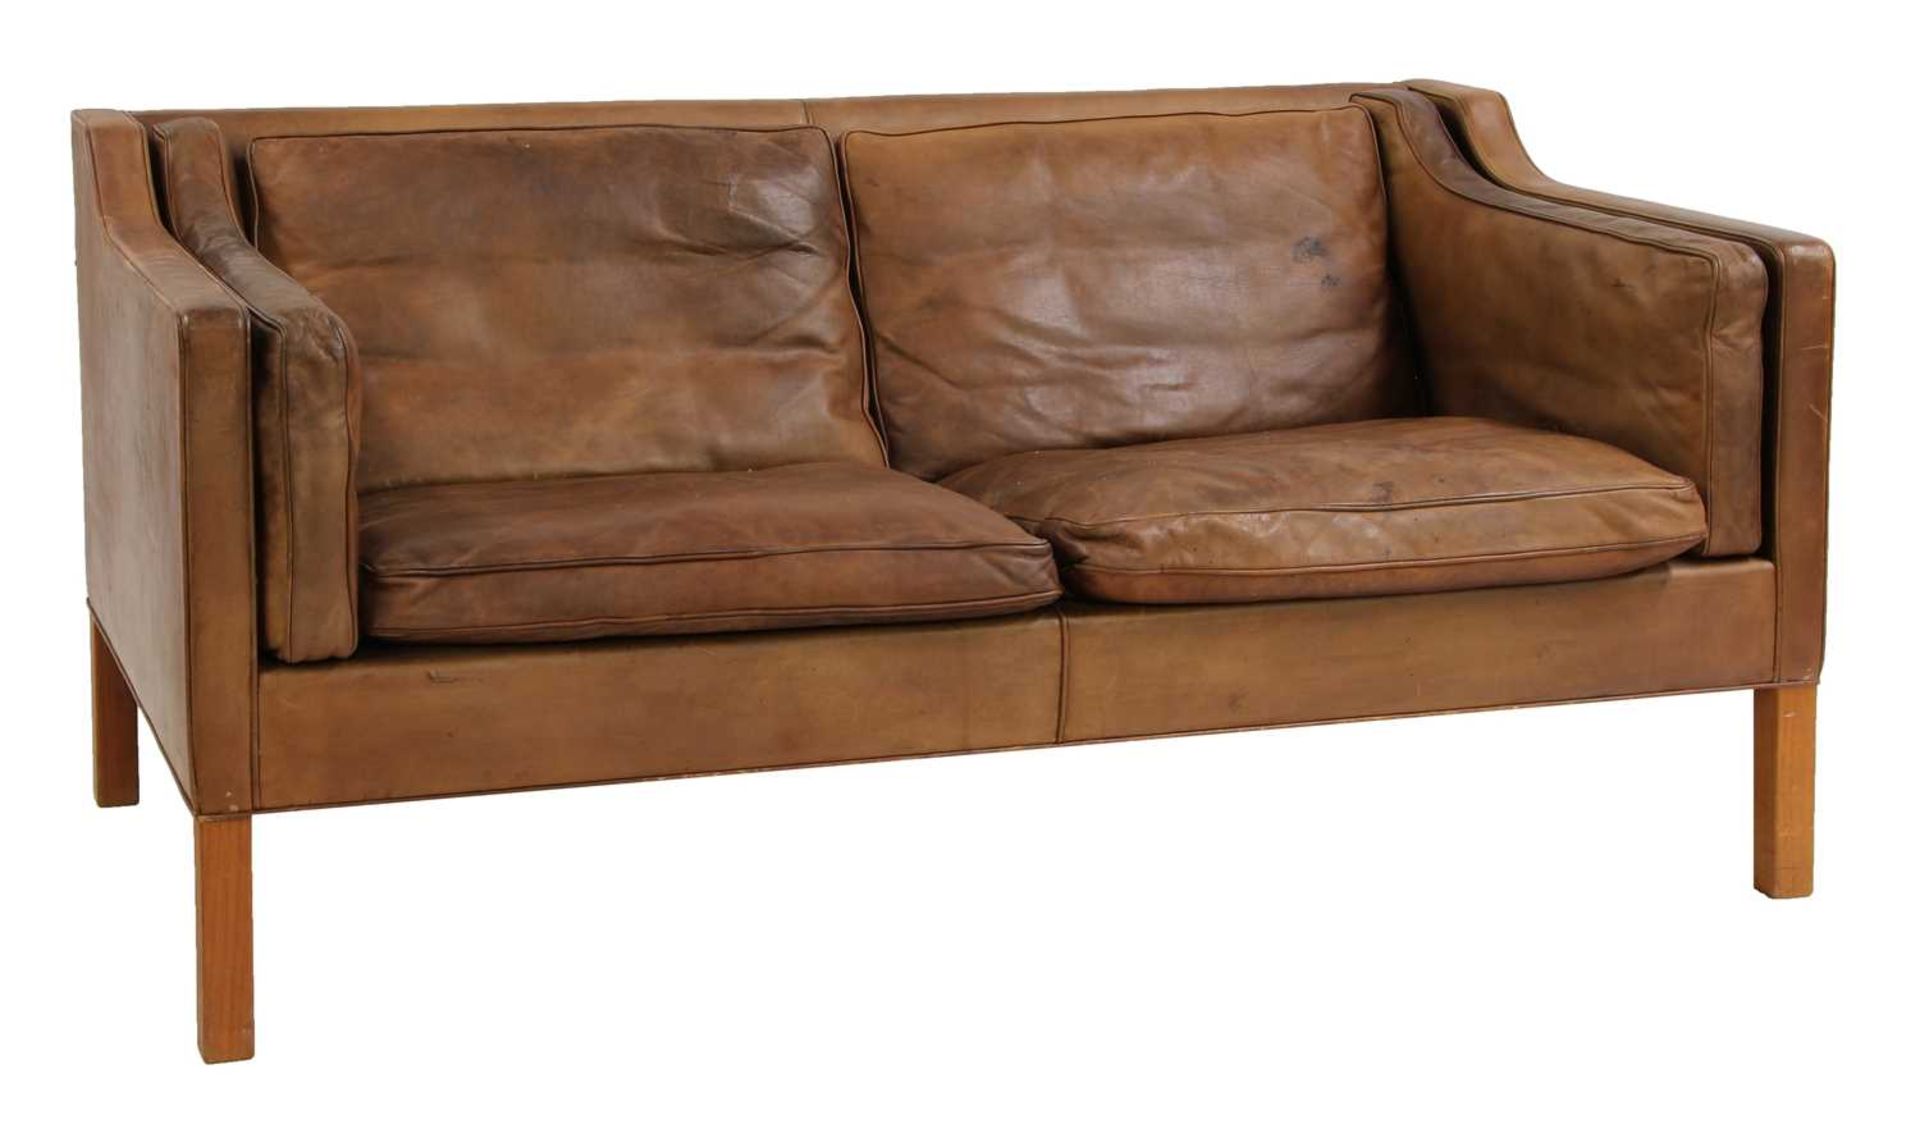 A brown leather 2212 settee,